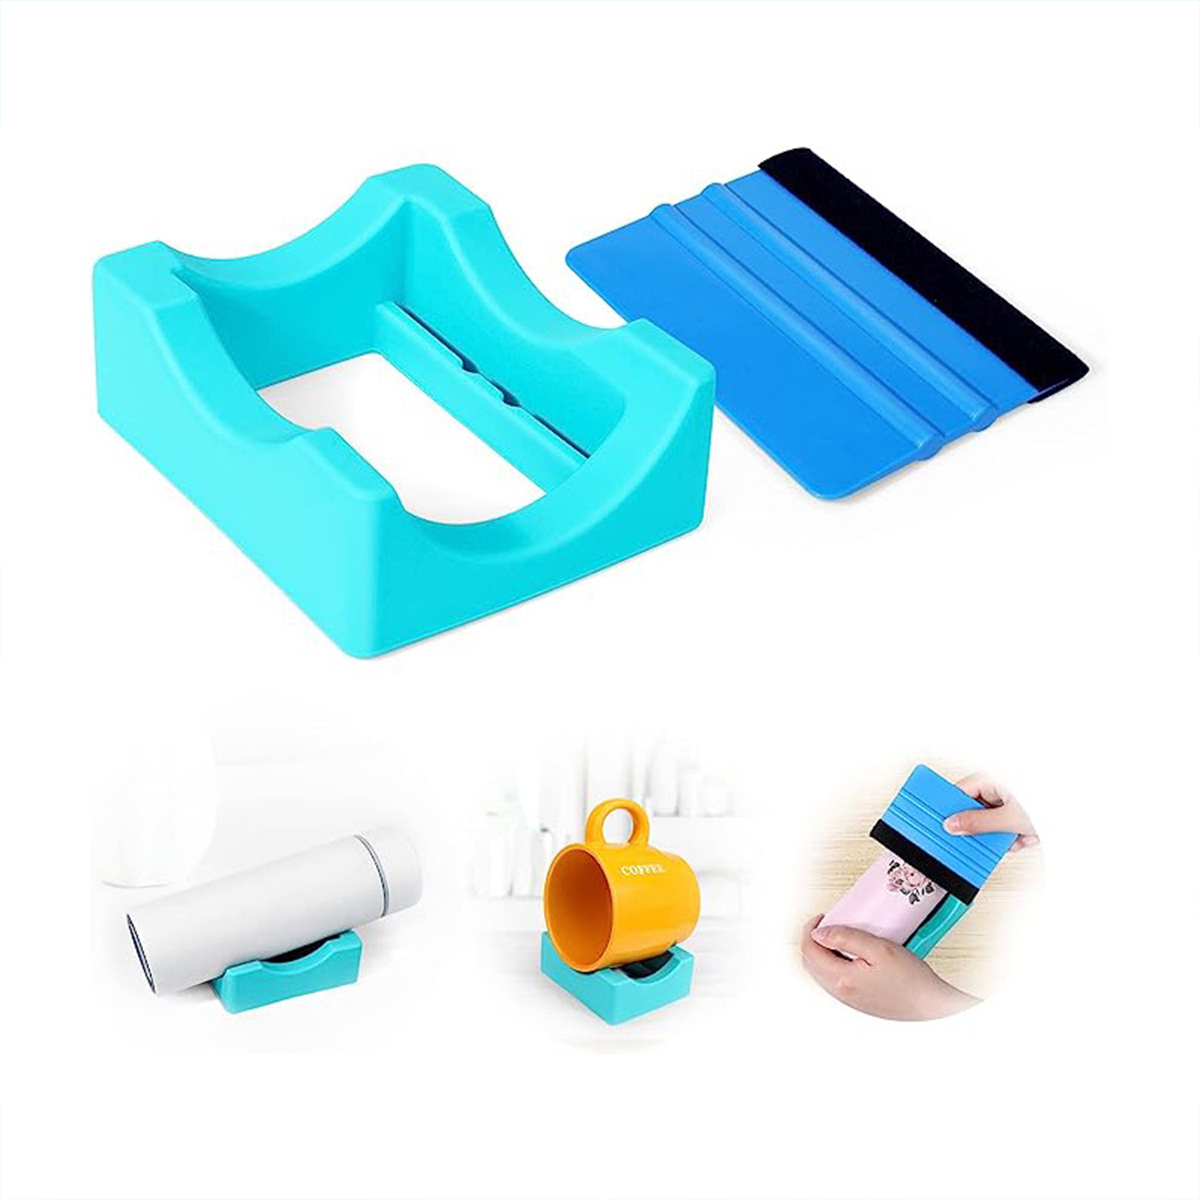 Silicone Cup Cradle for Tumblers with Built-in Slot, Crafts Use to